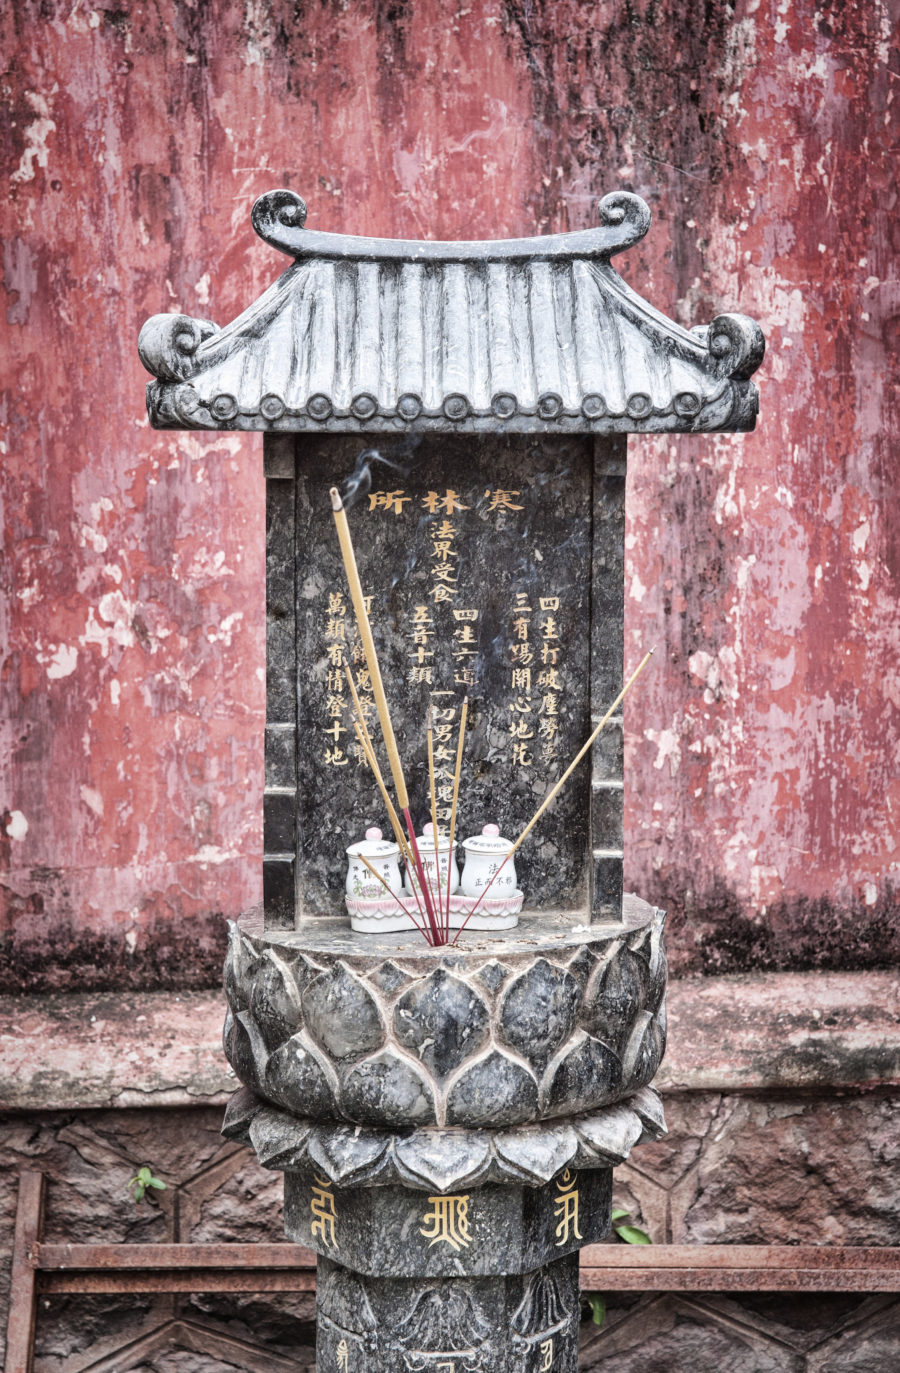 Images of a shrine in Vietnam - Standard photo